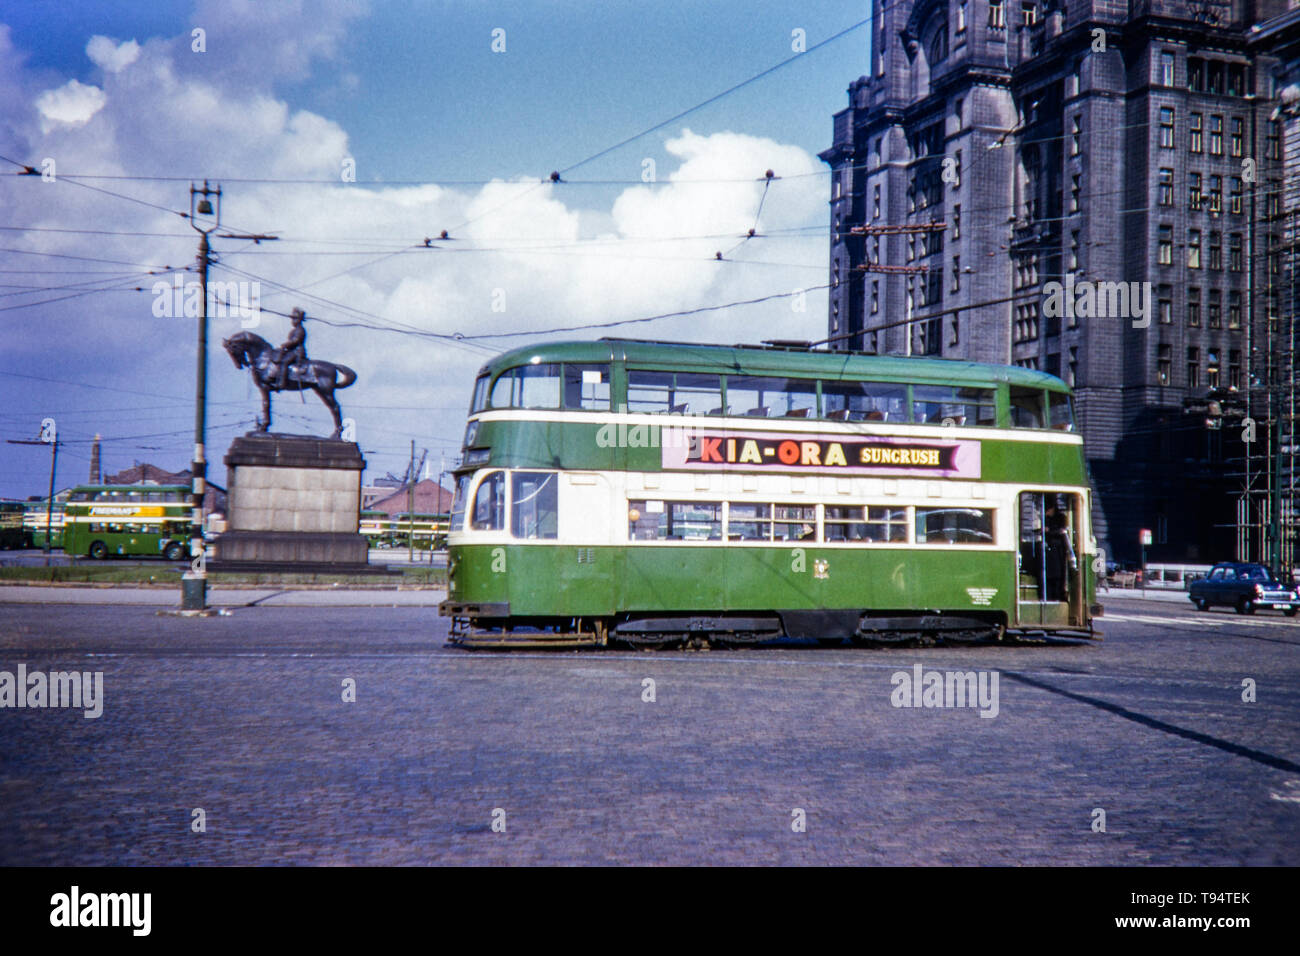 A Liverpool tram and the grade II listed Edward VII Monument at the now Unesco world heritage site of the Pier Head, Liverpool City Centre. Image taken in March 1956 a year before the trams were  decommissioned. Stock Photo